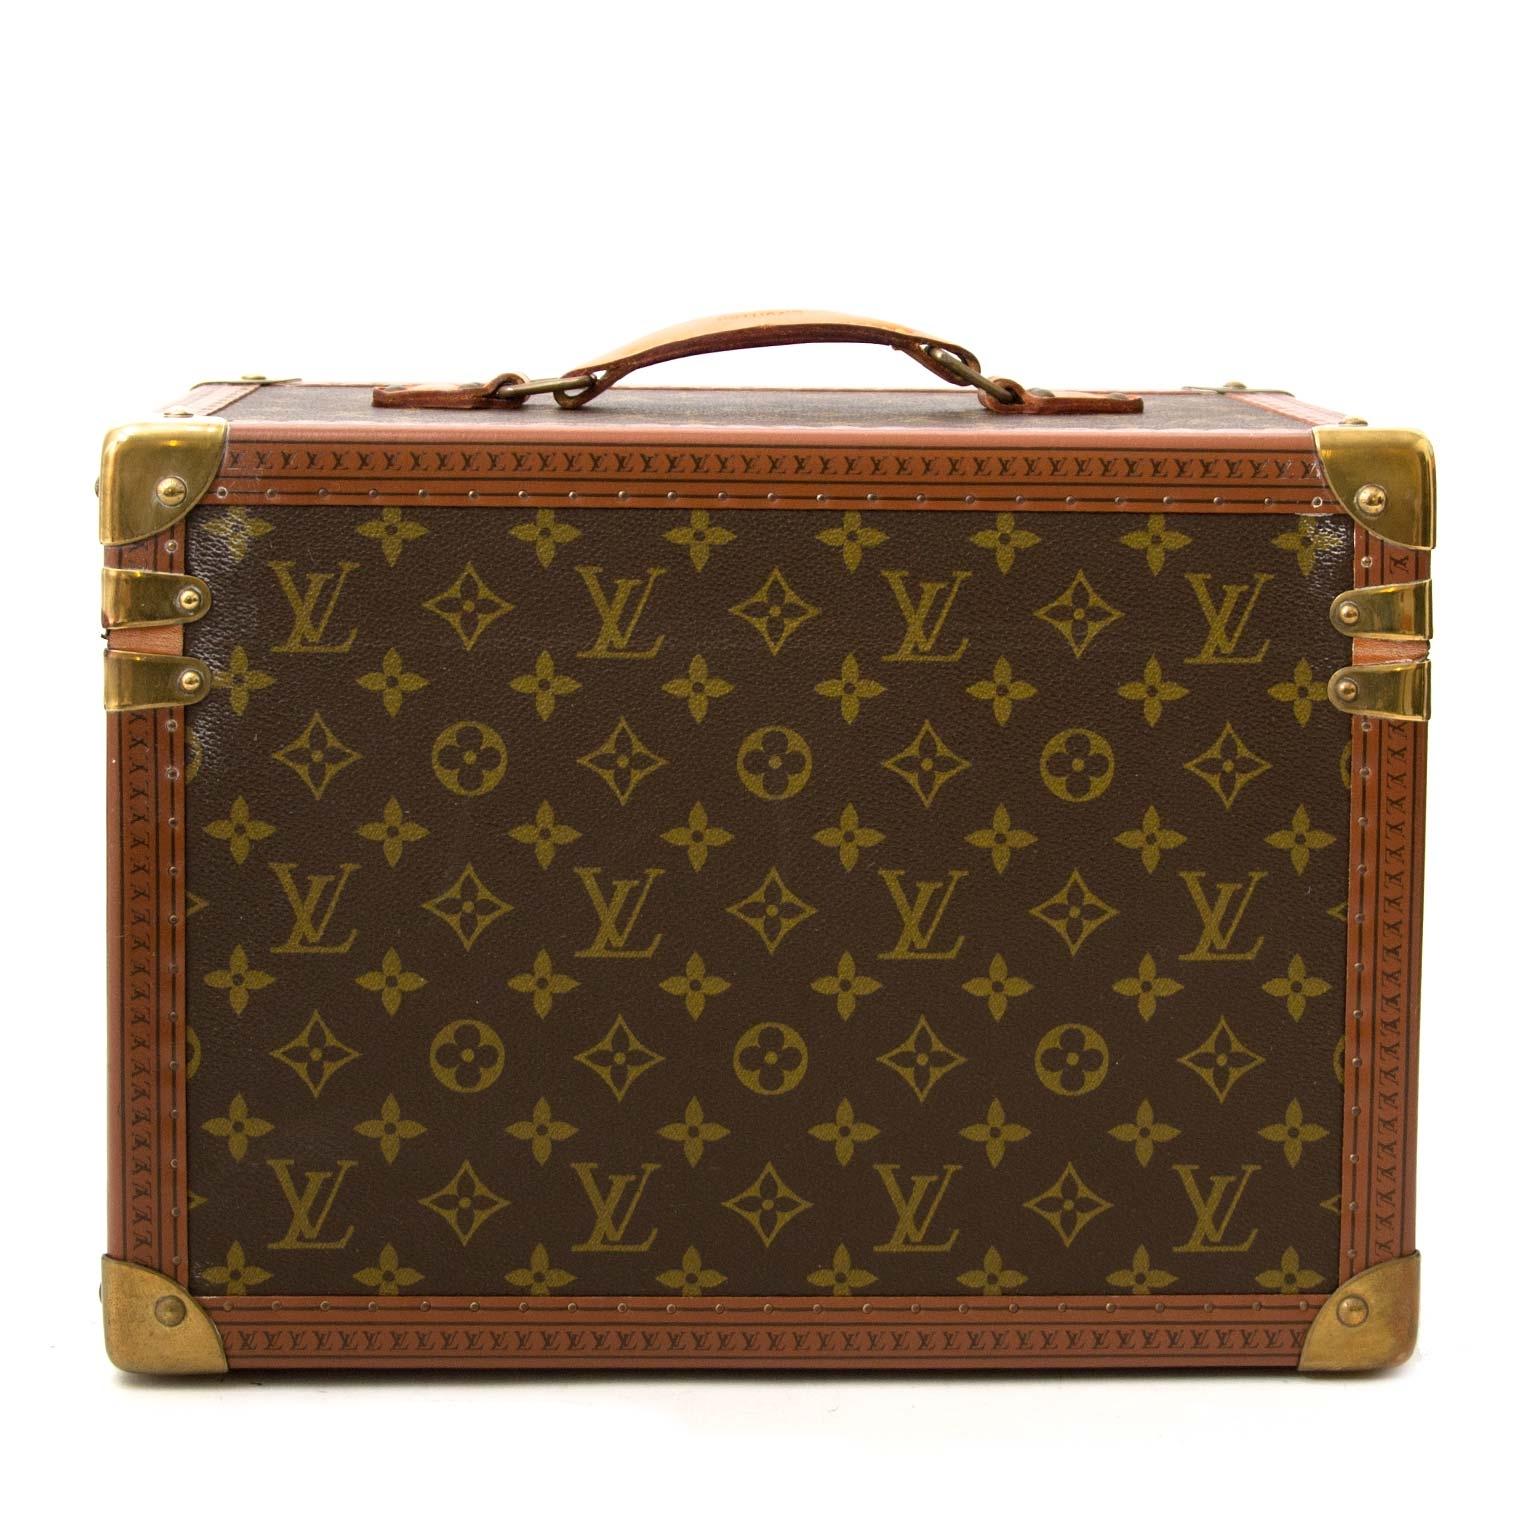 Good preloved condition

Louis Vuitton Monogram Travel Trunk Case

This simply gorgeous trunk case by Louis Vuitton is made from iconic monogram canvas and features brown leather edges with the LV logo drawn on. Inside the trunk has light beige